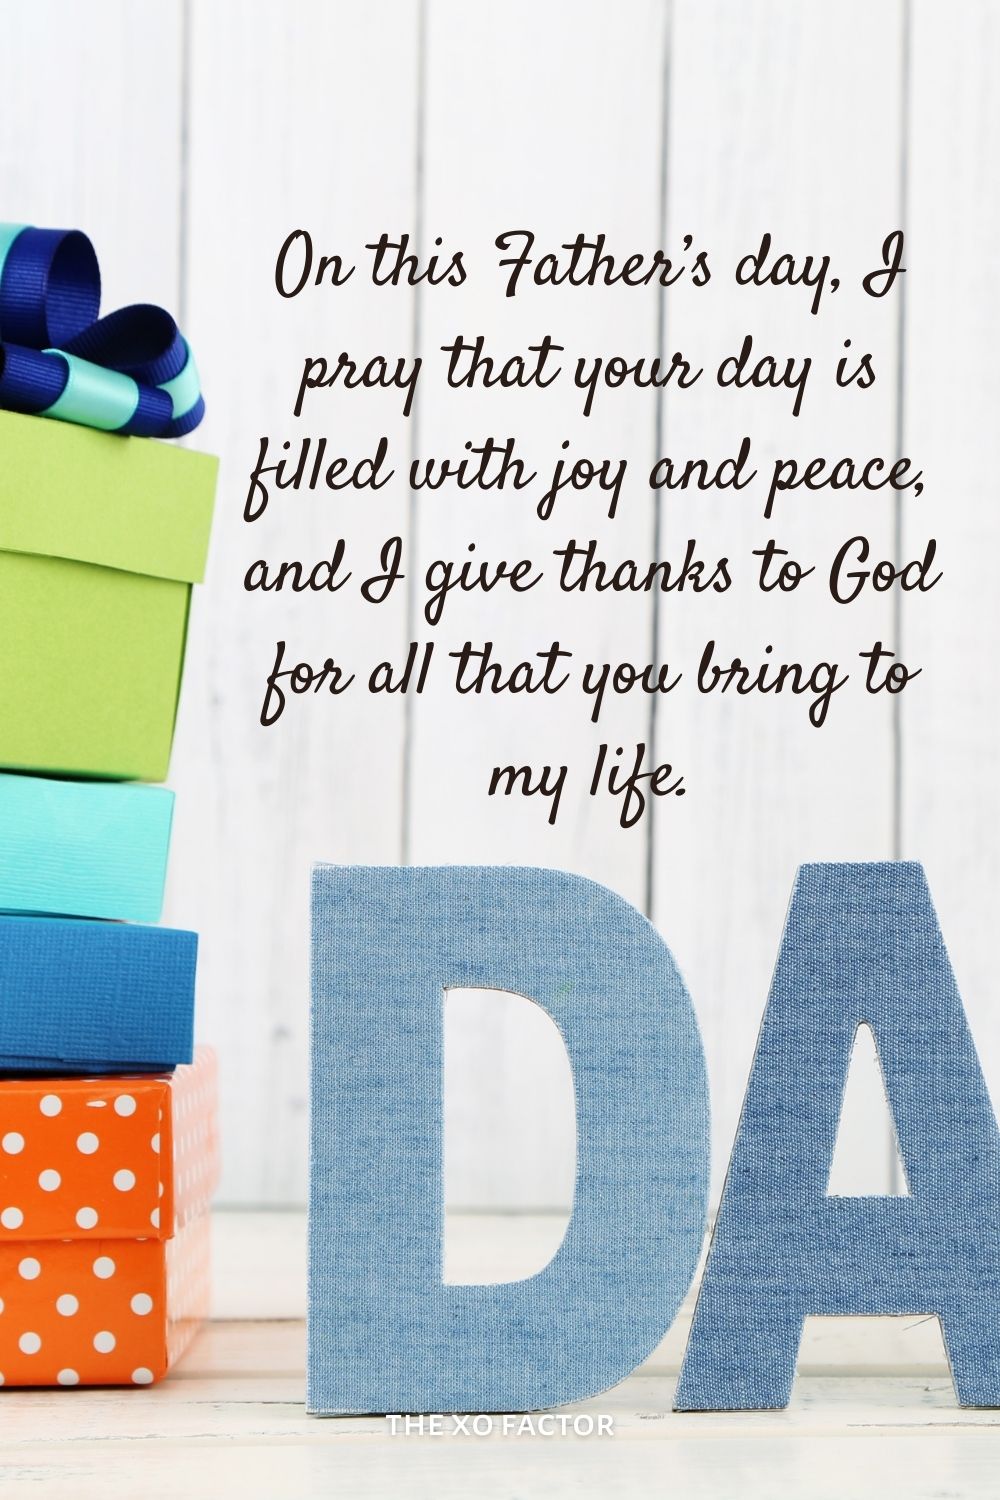 On this Father’s day, I pray that your day is filled with joy and peace, and I give thanks to God for all that you bring to my life.